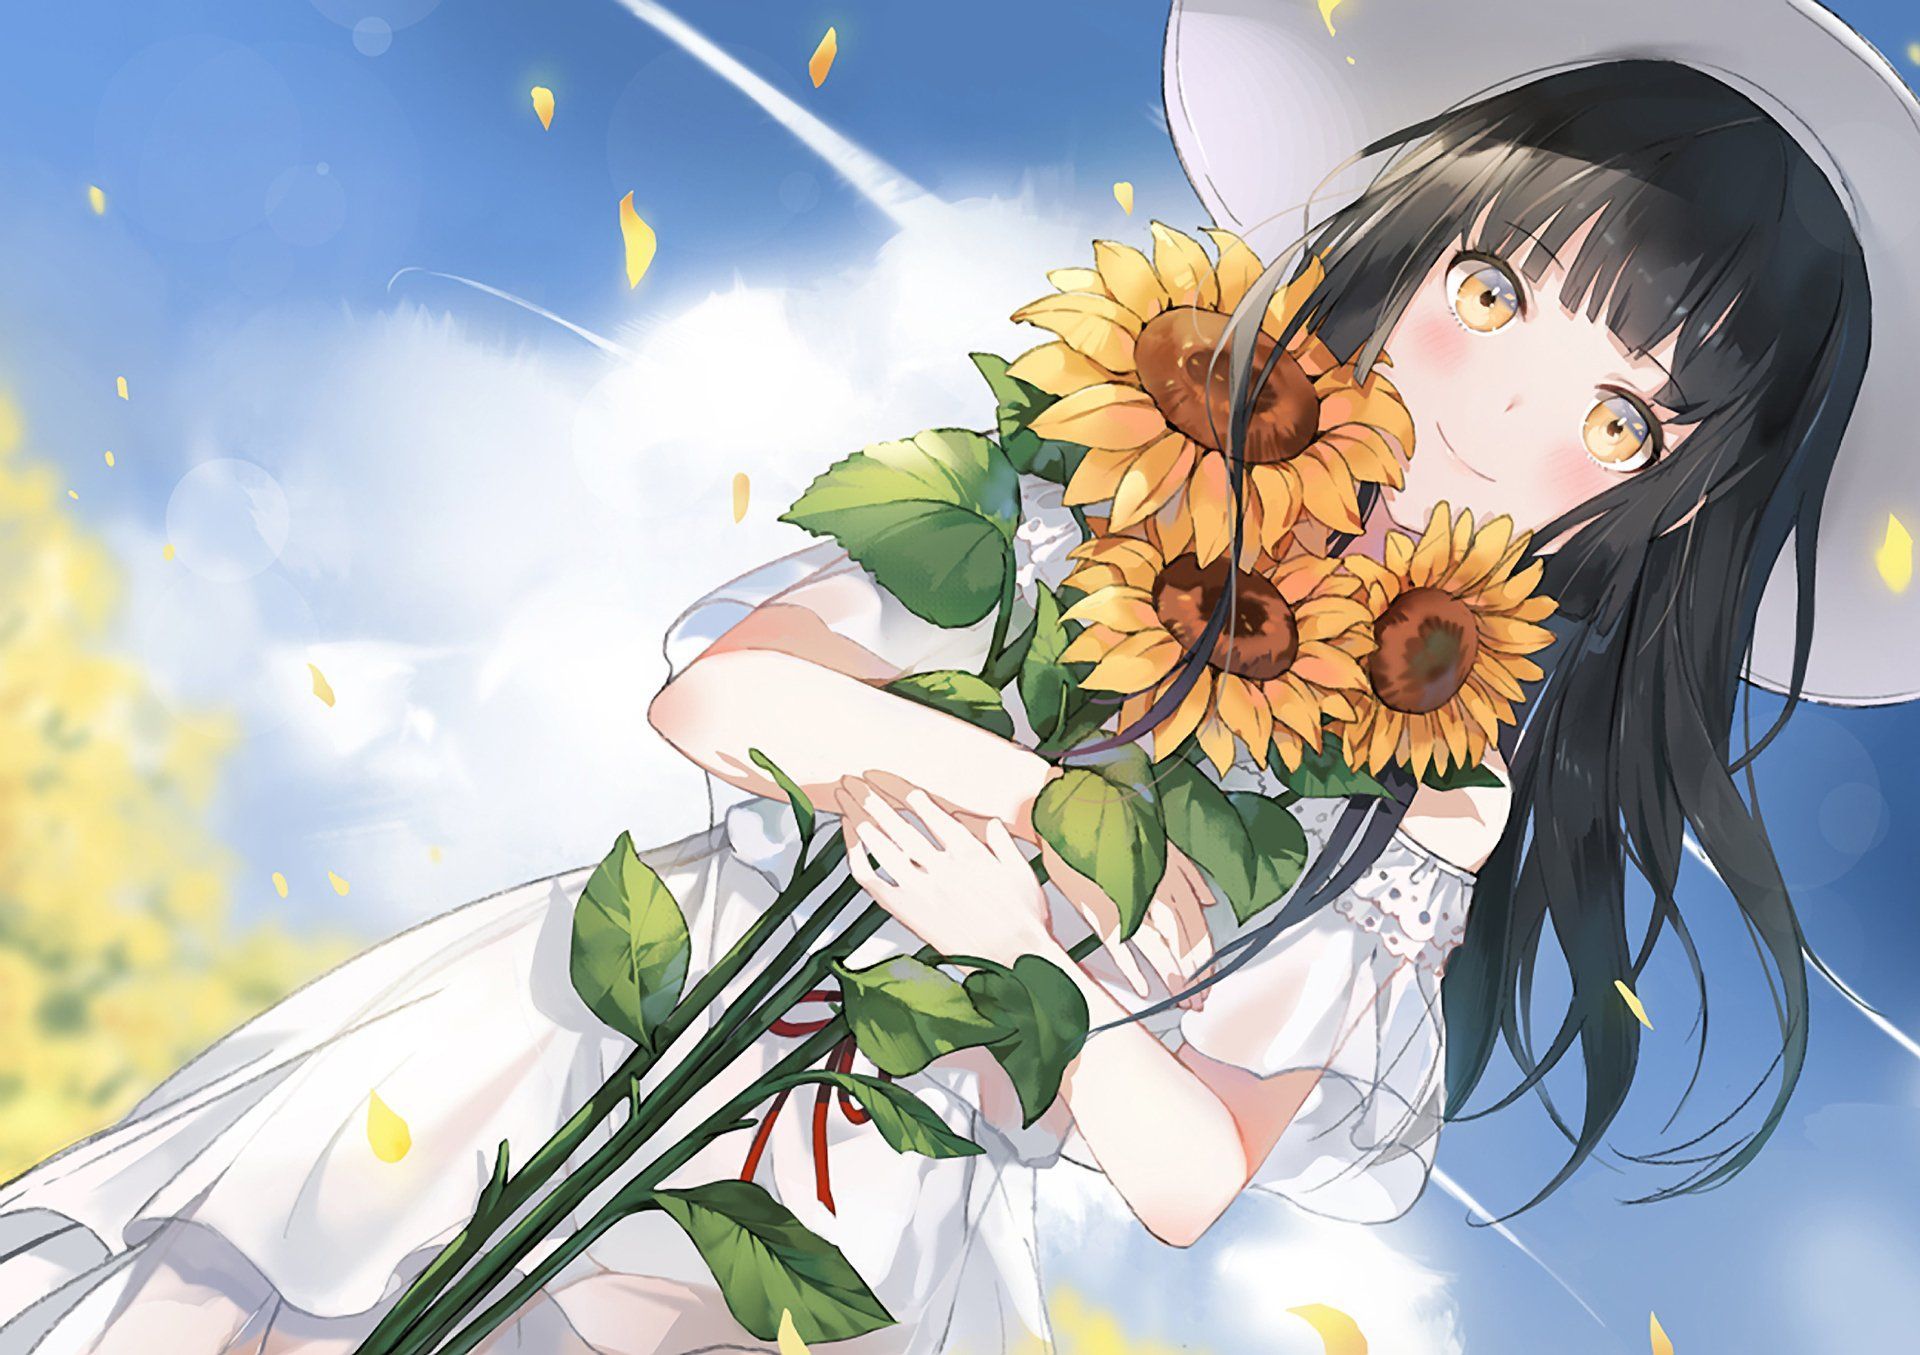 Original Wallpaper Background Image. View, download, comment, and rate. sunflower. Anime flower, Anime art, Anime